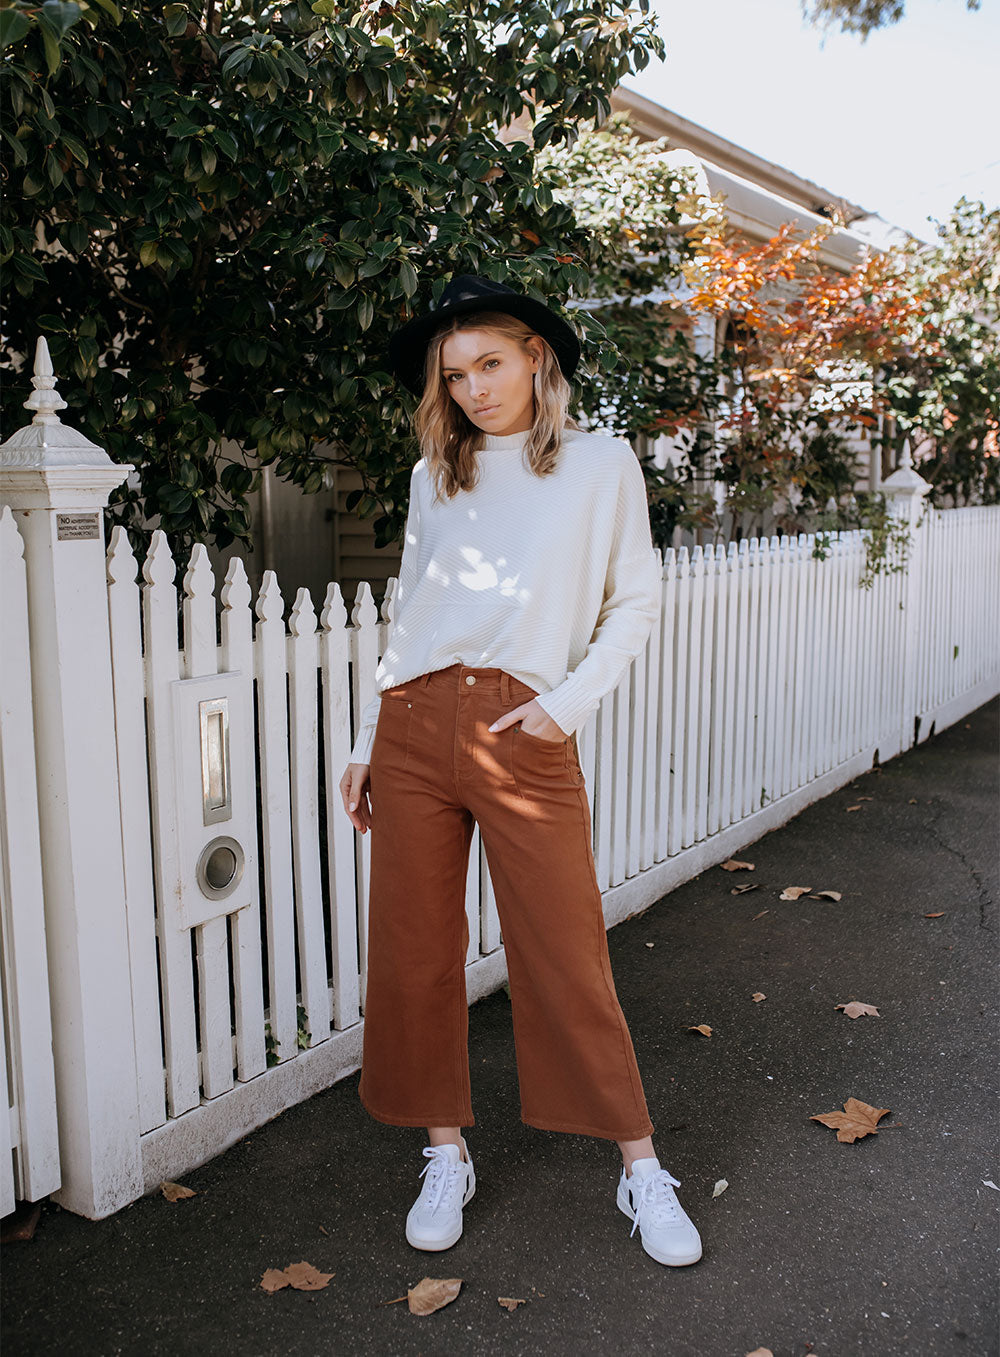 Stassy Wide Leg Pant featuresfunctional pockets back and front, fitted through the hips with subtle darts through the front, cropped in length, flared from the knee down, belt loops and press dtud button..